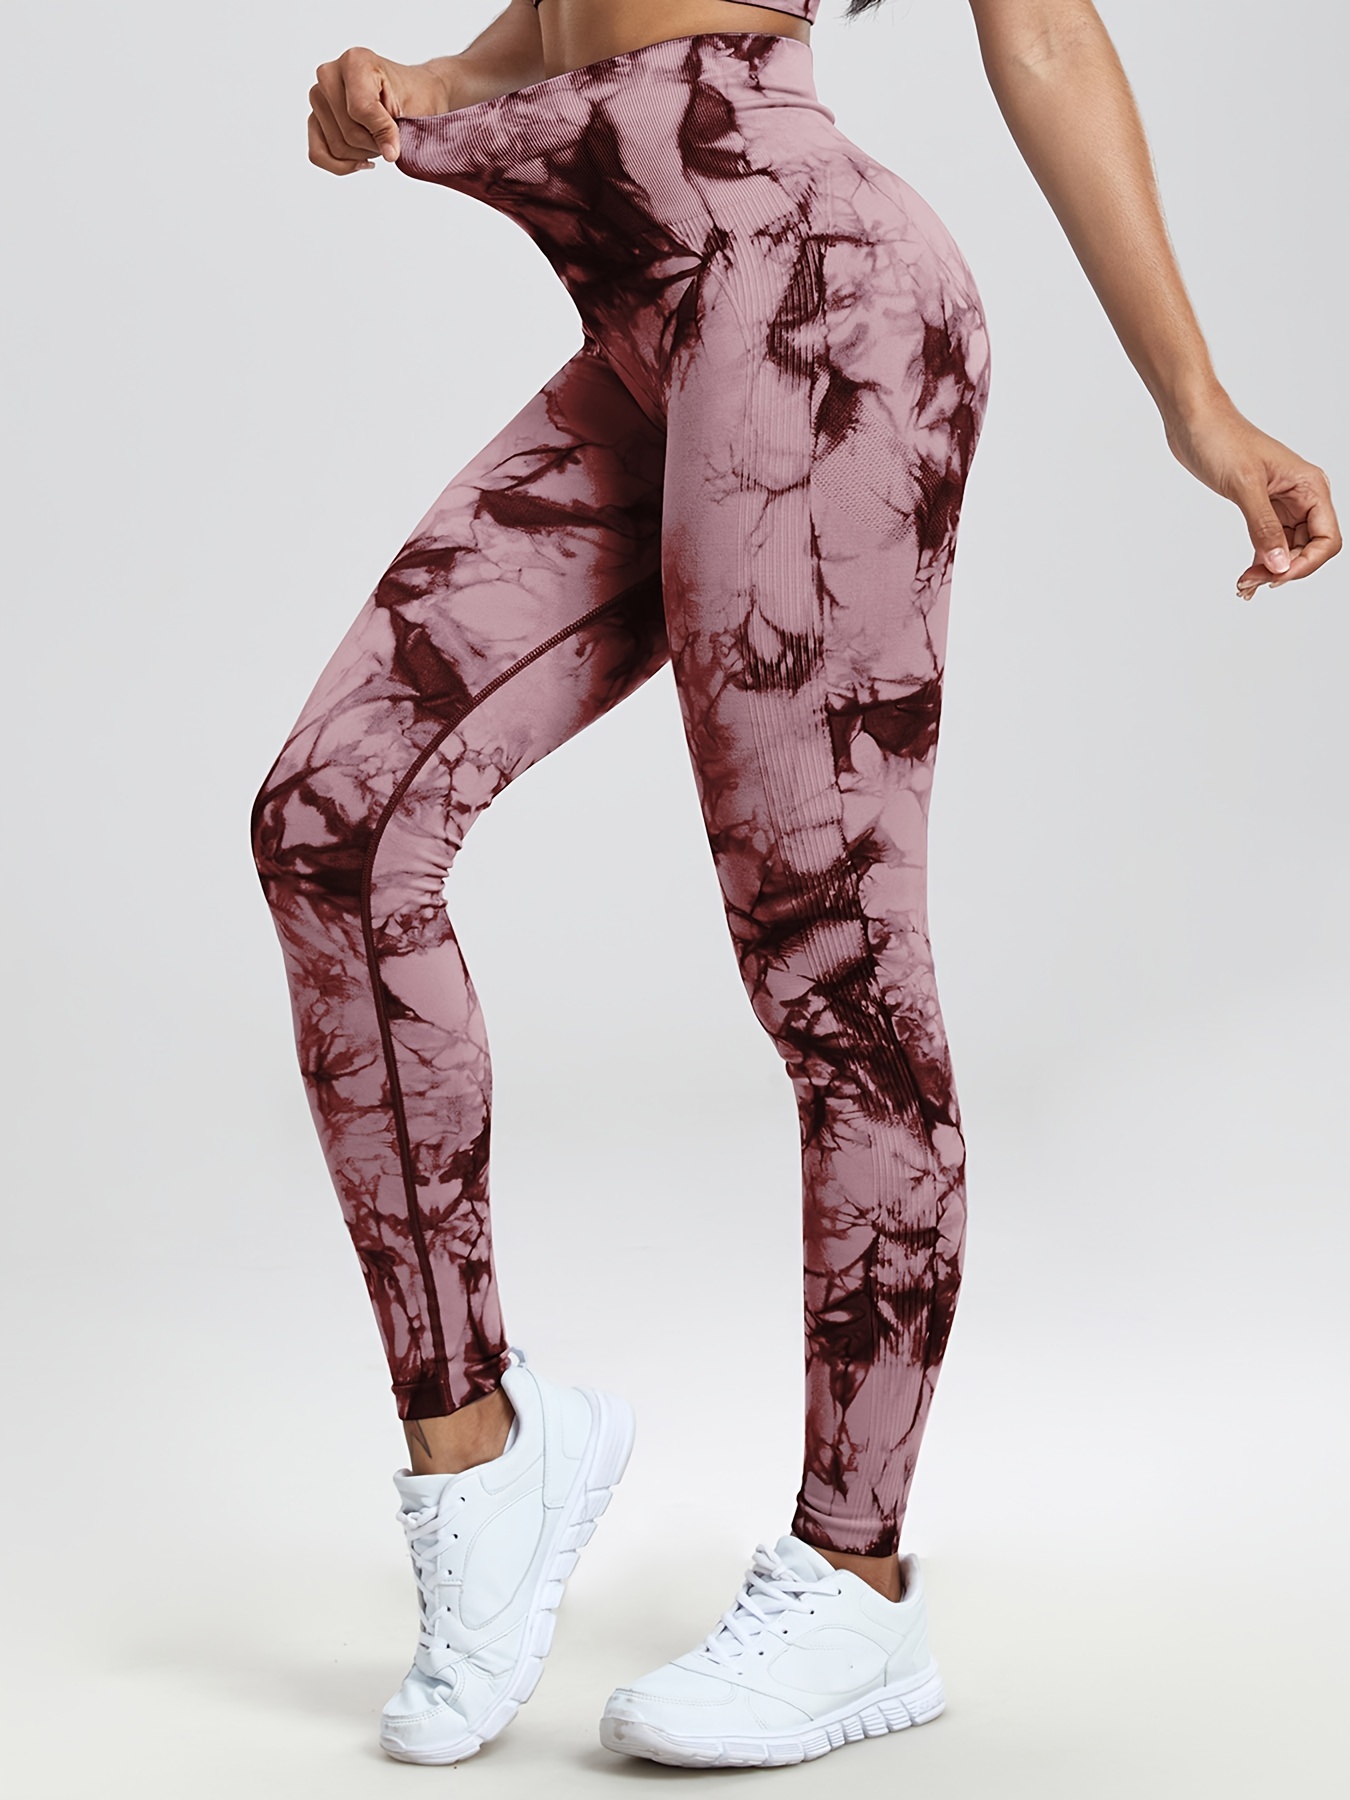 Women's Sports Leggings, Printed Workout Ladies Leggings, Push up Yoga  Pants, Seamless Fitness Trousers for Gymnastics, Activewear for Women -   New Zealand